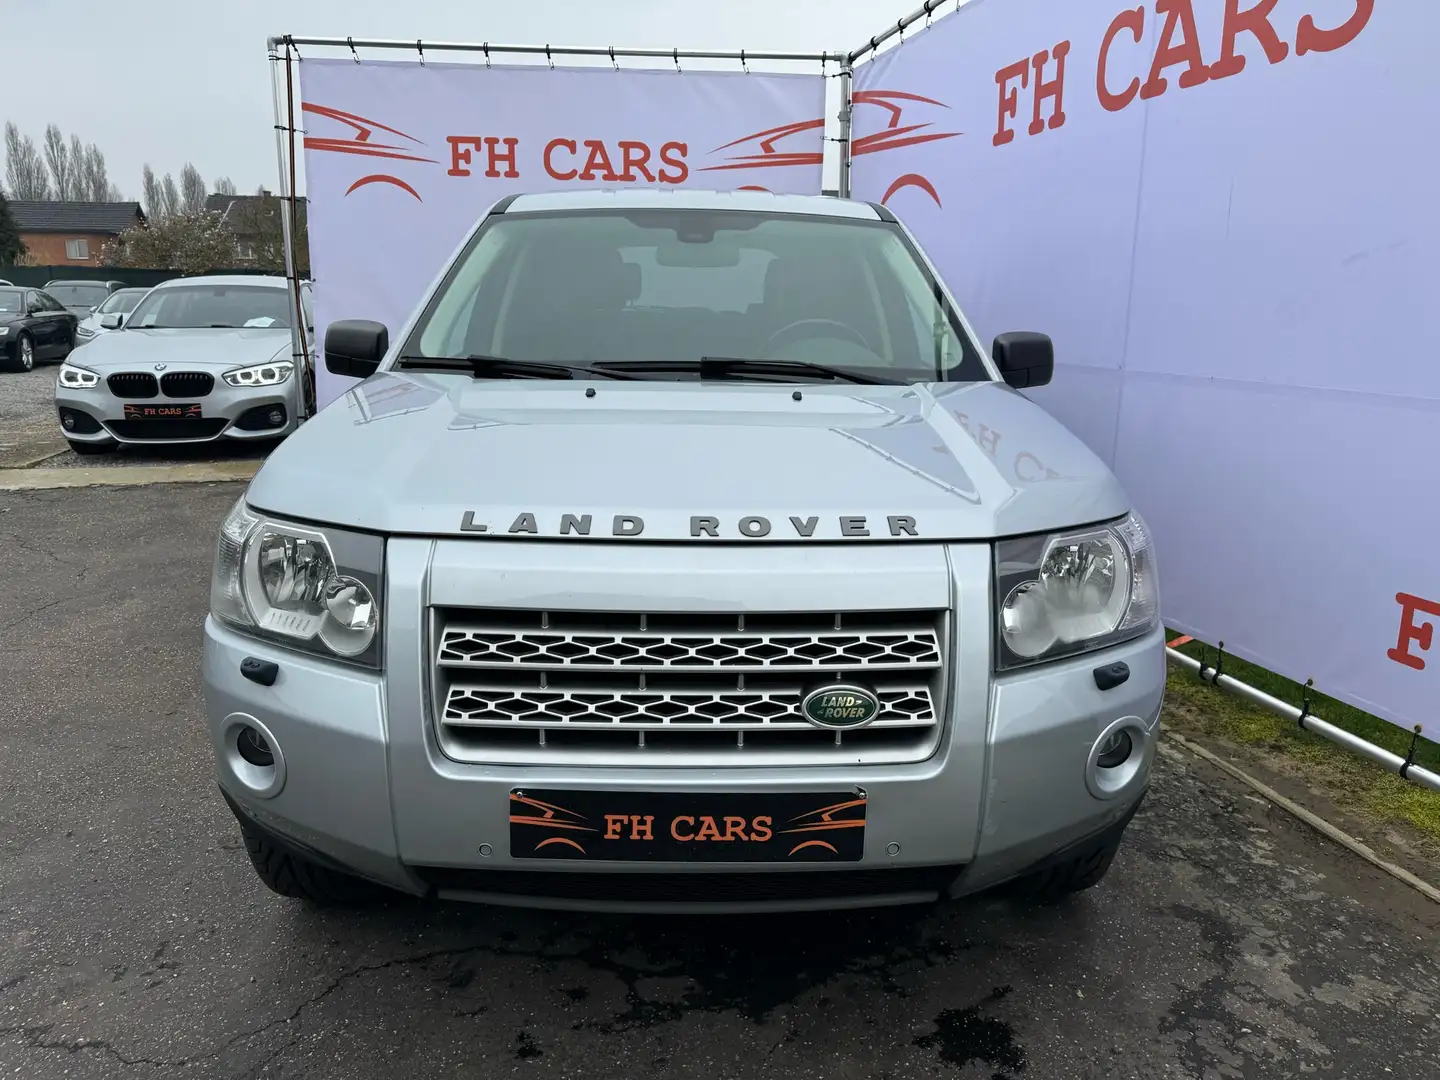 Land Rover Freelander 2.2 ed4 HSE 4x4 AUTOMATIC Zilver - 2